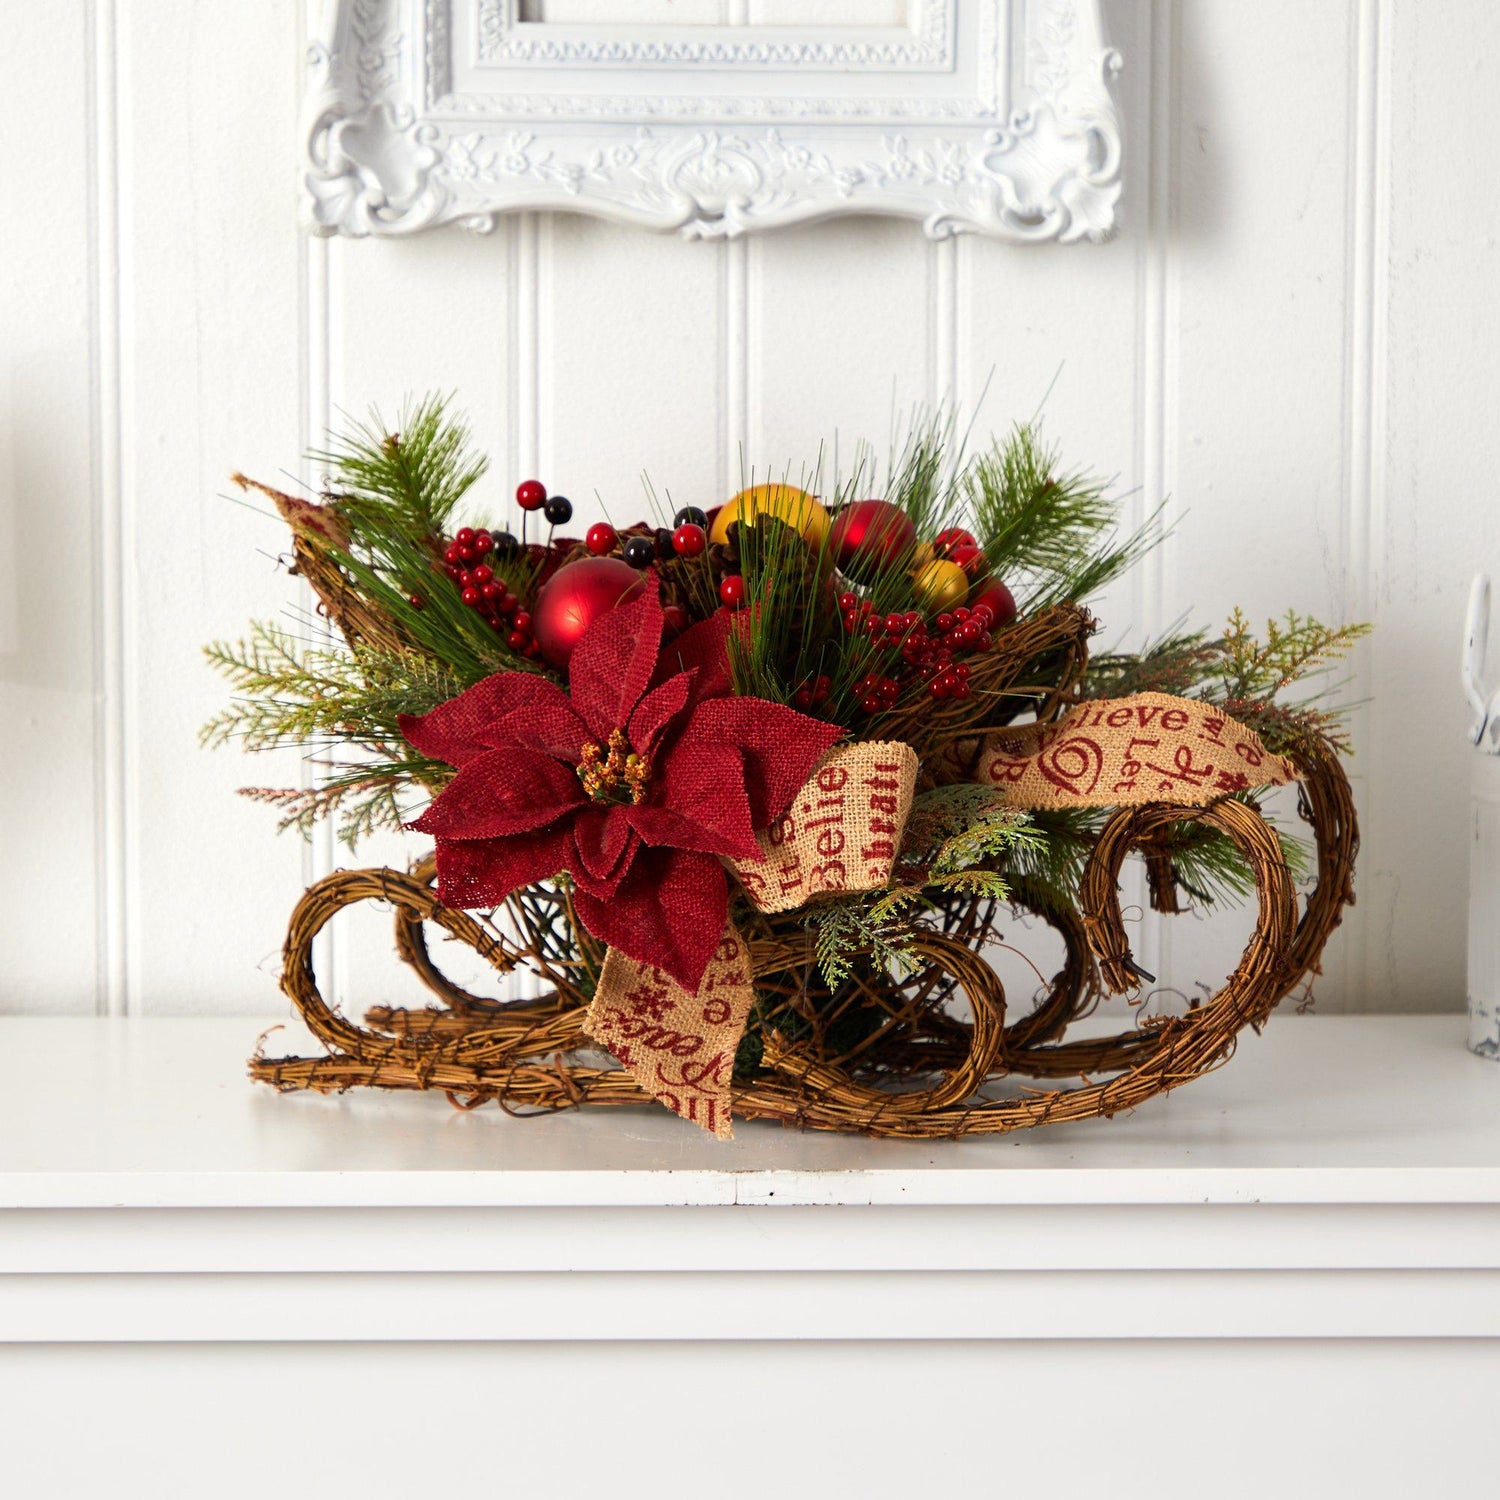 18” Christmas Sleigh with Poinsettia, Berries and Pinecone Artificial Arrangement with Ornaments